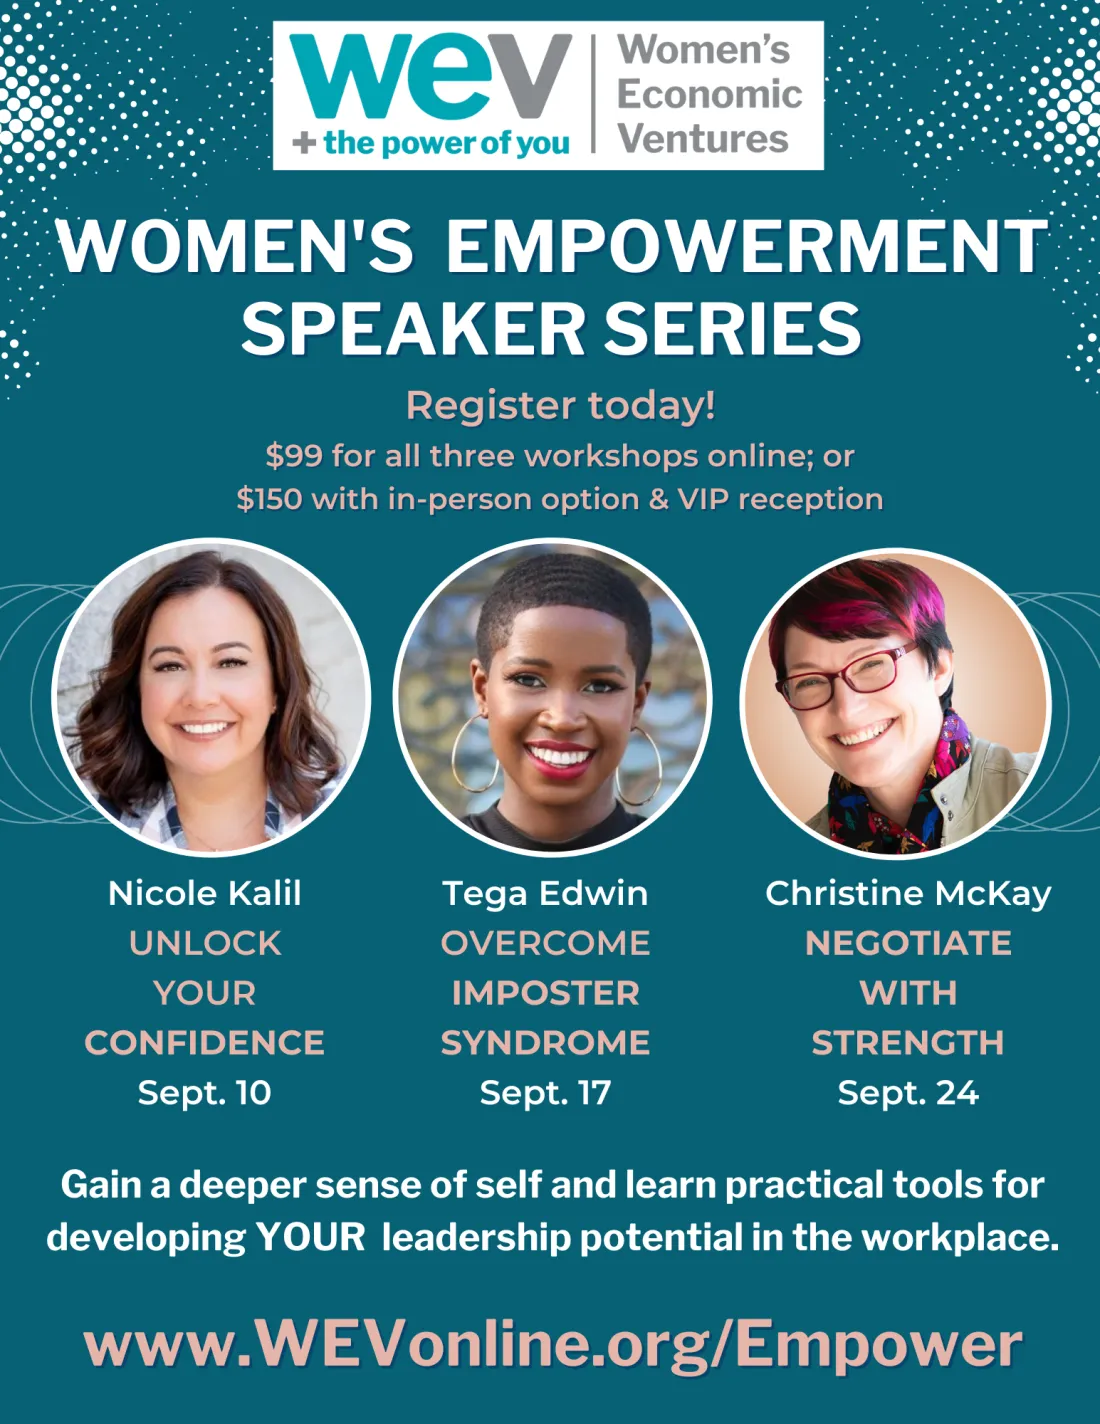 Unlock Your Confidence with Nicole Kalil on Friday, September 10 at 12:00 PM PDT, Overcome Imposter Syndrome with Tega Edwin on Friday, September 17 at 12:00 PM PDT, Negotiate With Strength with Christine McKay on Friday, September 24 at 12:00 PM PDT